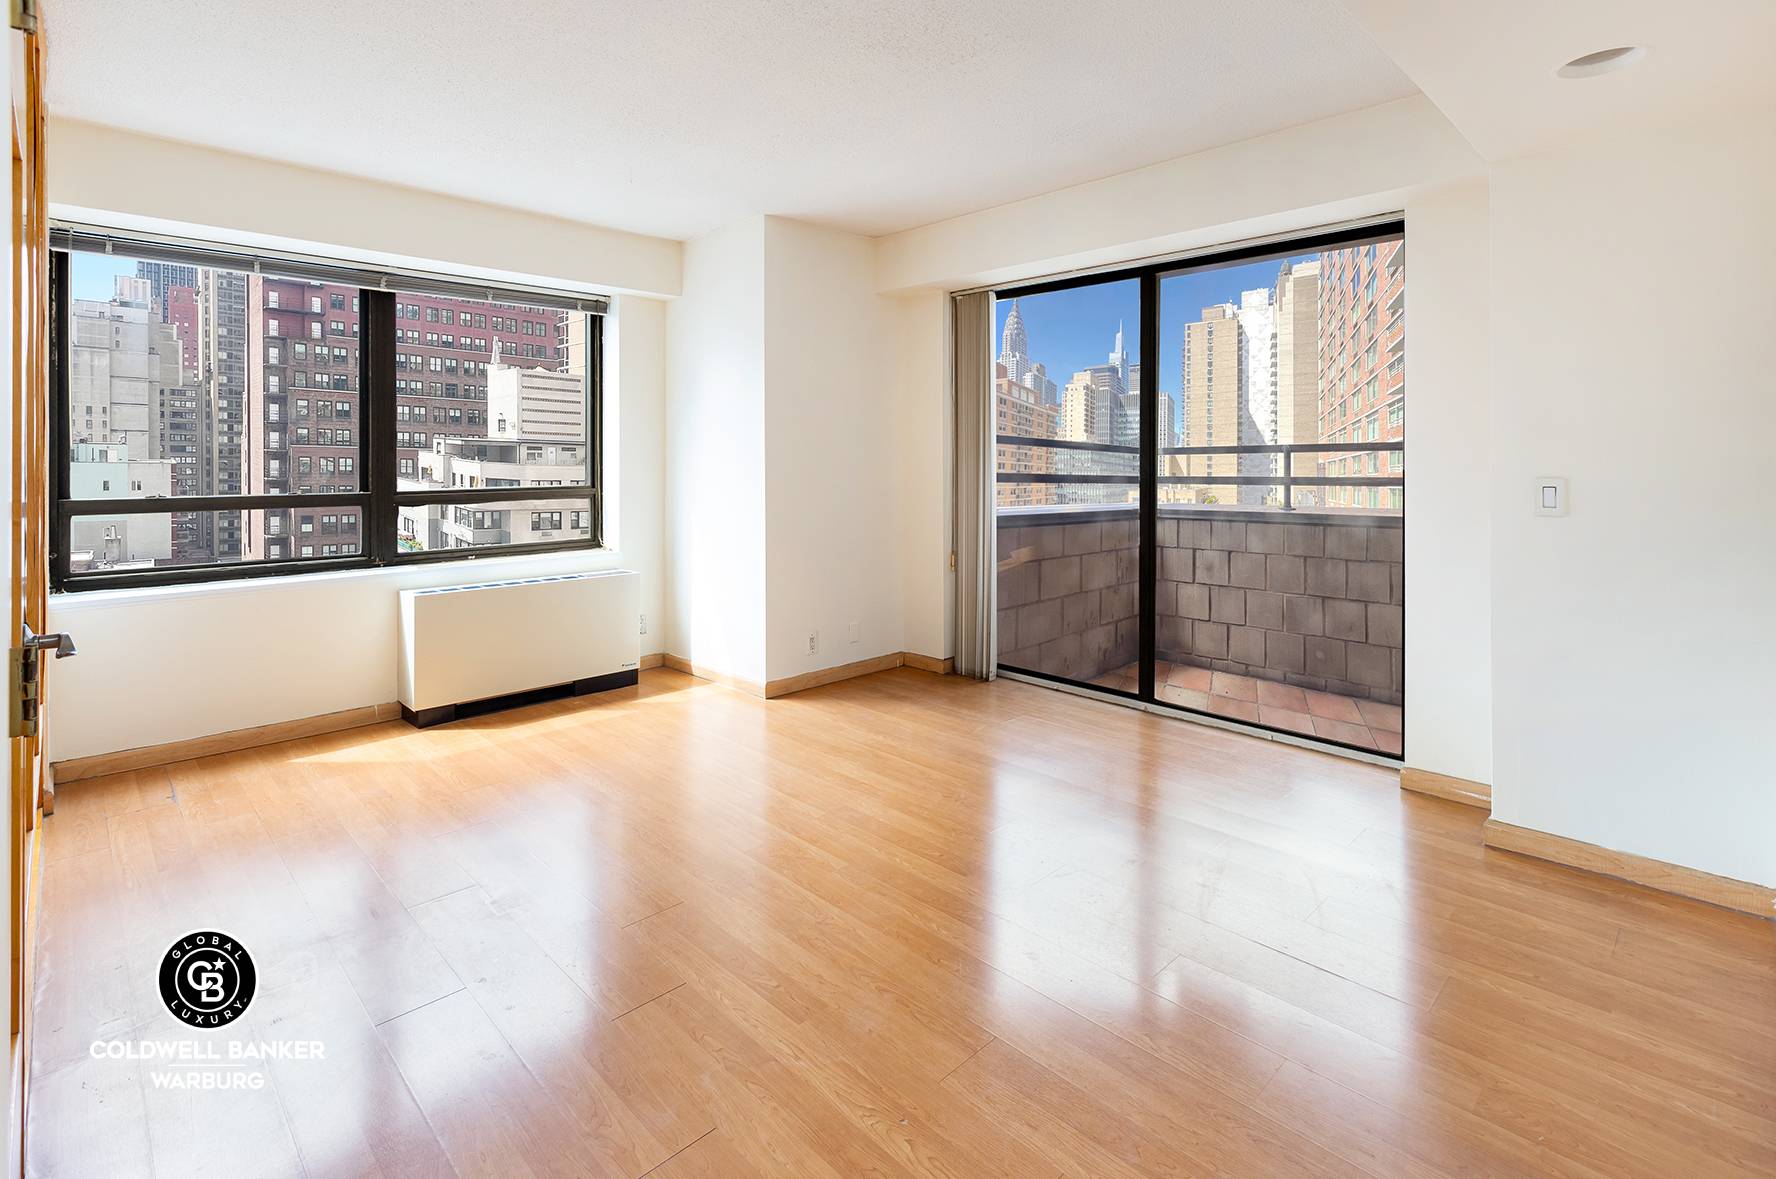 Southern and western exposures and Chrysler Building views from every room in this light filled, corner one bedroom, one bath residence with private balcony in Turtle Bay s luxurious Dag ...